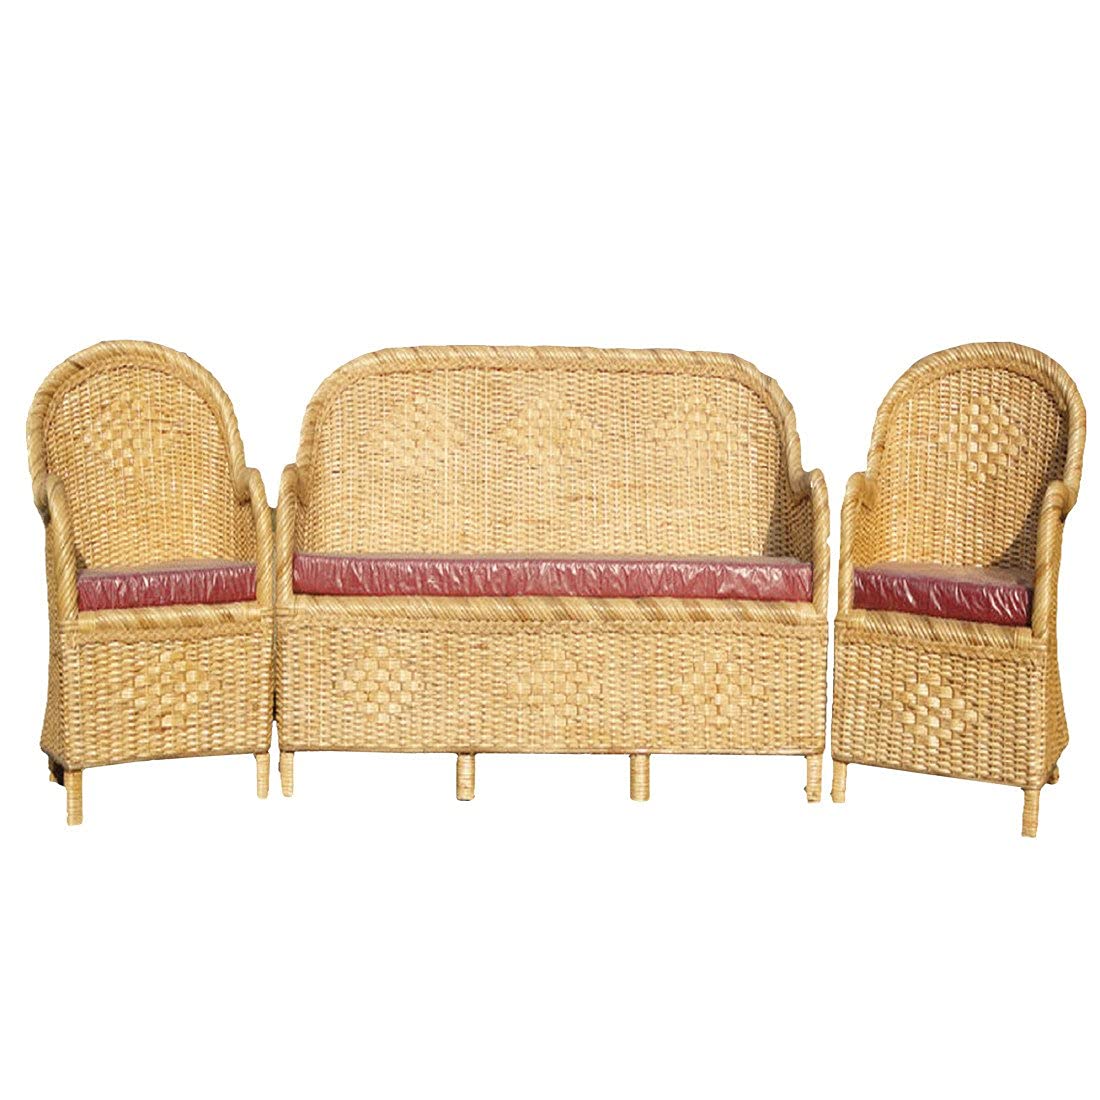 Bamboo Cane Weaving Sofa Set With Table